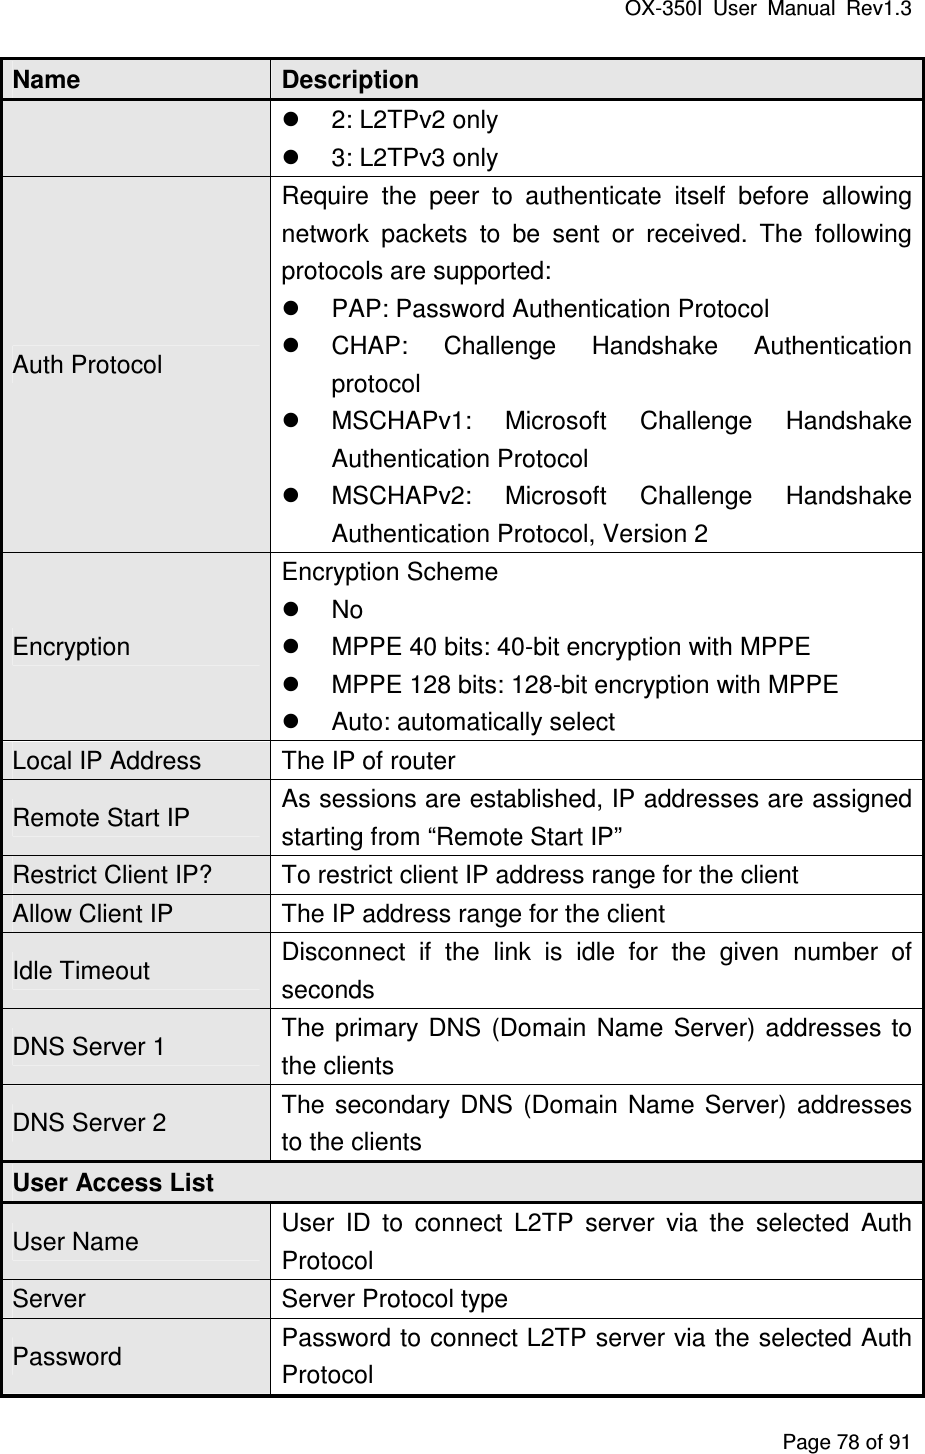 OX-350I  User  Manual  Rev1.3 Page 78 of 91 Name  Description   2: L2TPv2 only   3: L2TPv3 only Auth Protocol Require  the  peer  to  authenticate  itself  before  allowing network  packets  to  be  sent  or  received.  The  following protocols are supported:   PAP: Password Authentication Protocol   CHAP:  Challenge  Handshake  Authentication protocol   MSCHAPv1:  Microsoft  Challenge  Handshake Authentication Protocol   MSCHAPv2:  Microsoft  Challenge  Handshake Authentication Protocol, Version 2 Encryption Encryption Scheme   No   MPPE 40 bits: 40-bit encryption with MPPE   MPPE 128 bits: 128-bit encryption with MPPE   Auto: automatically select Local IP Address  The IP of router Remote Start IP  As sessions are established, IP addresses are assigned starting from “Remote Start IP” Restrict Client IP?  To restrict client IP address range for the client Allow Client IP  The IP address range for the client Idle Timeout  Disconnect  if  the  link  is  idle  for  the  given  number  of seconds DNS Server 1  The  primary  DNS  (Domain  Name  Server)  addresses  to the clients DNS Server 2  The  secondary  DNS  (Domain  Name  Server)  addresses to the clients User Access List User Name  User  ID  to  connect  L2TP  server  via  the  selected  Auth Protocol Server  Server Protocol type Password  Password to connect L2TP server via the selected Auth Protocol 